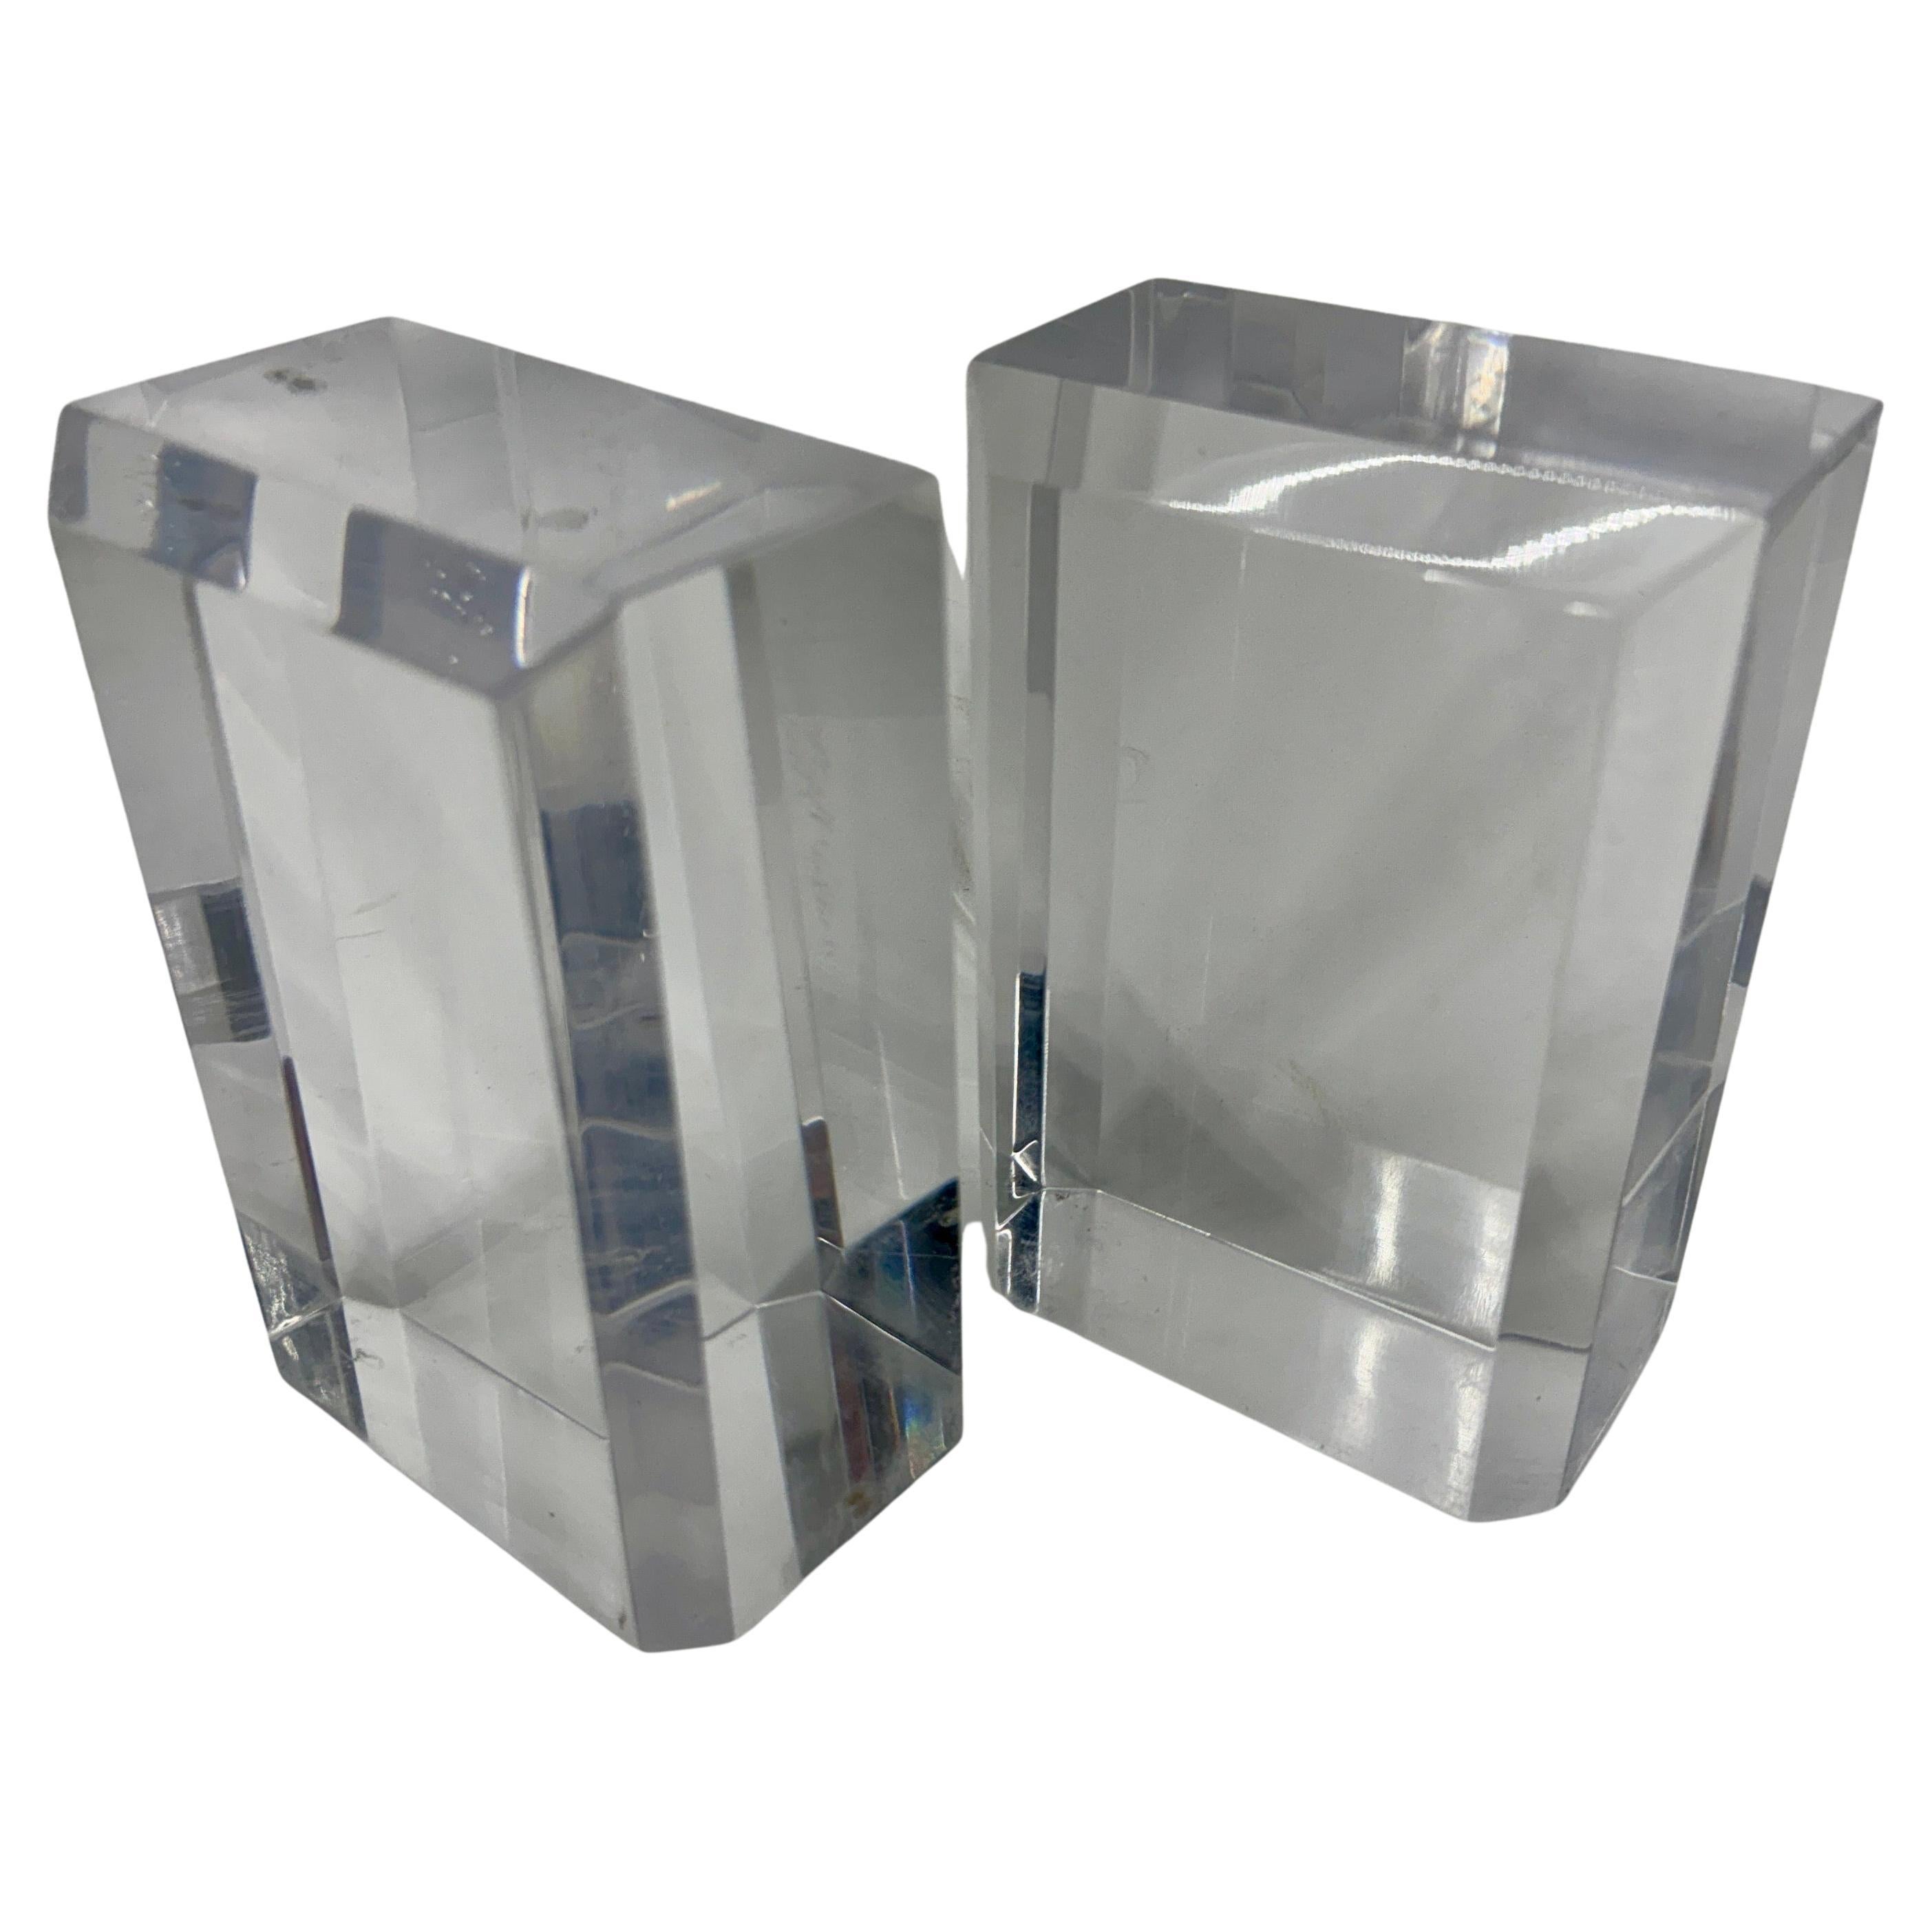 Lucite Mid-Century Bookend Set, 1960's 

Vintage Mid-Century Modern, heavy Lucite bookends with beautiful beveled edges. These bookends almost glow when the light hits them. Polished and substantial, this pair is an excellent addition to any modern